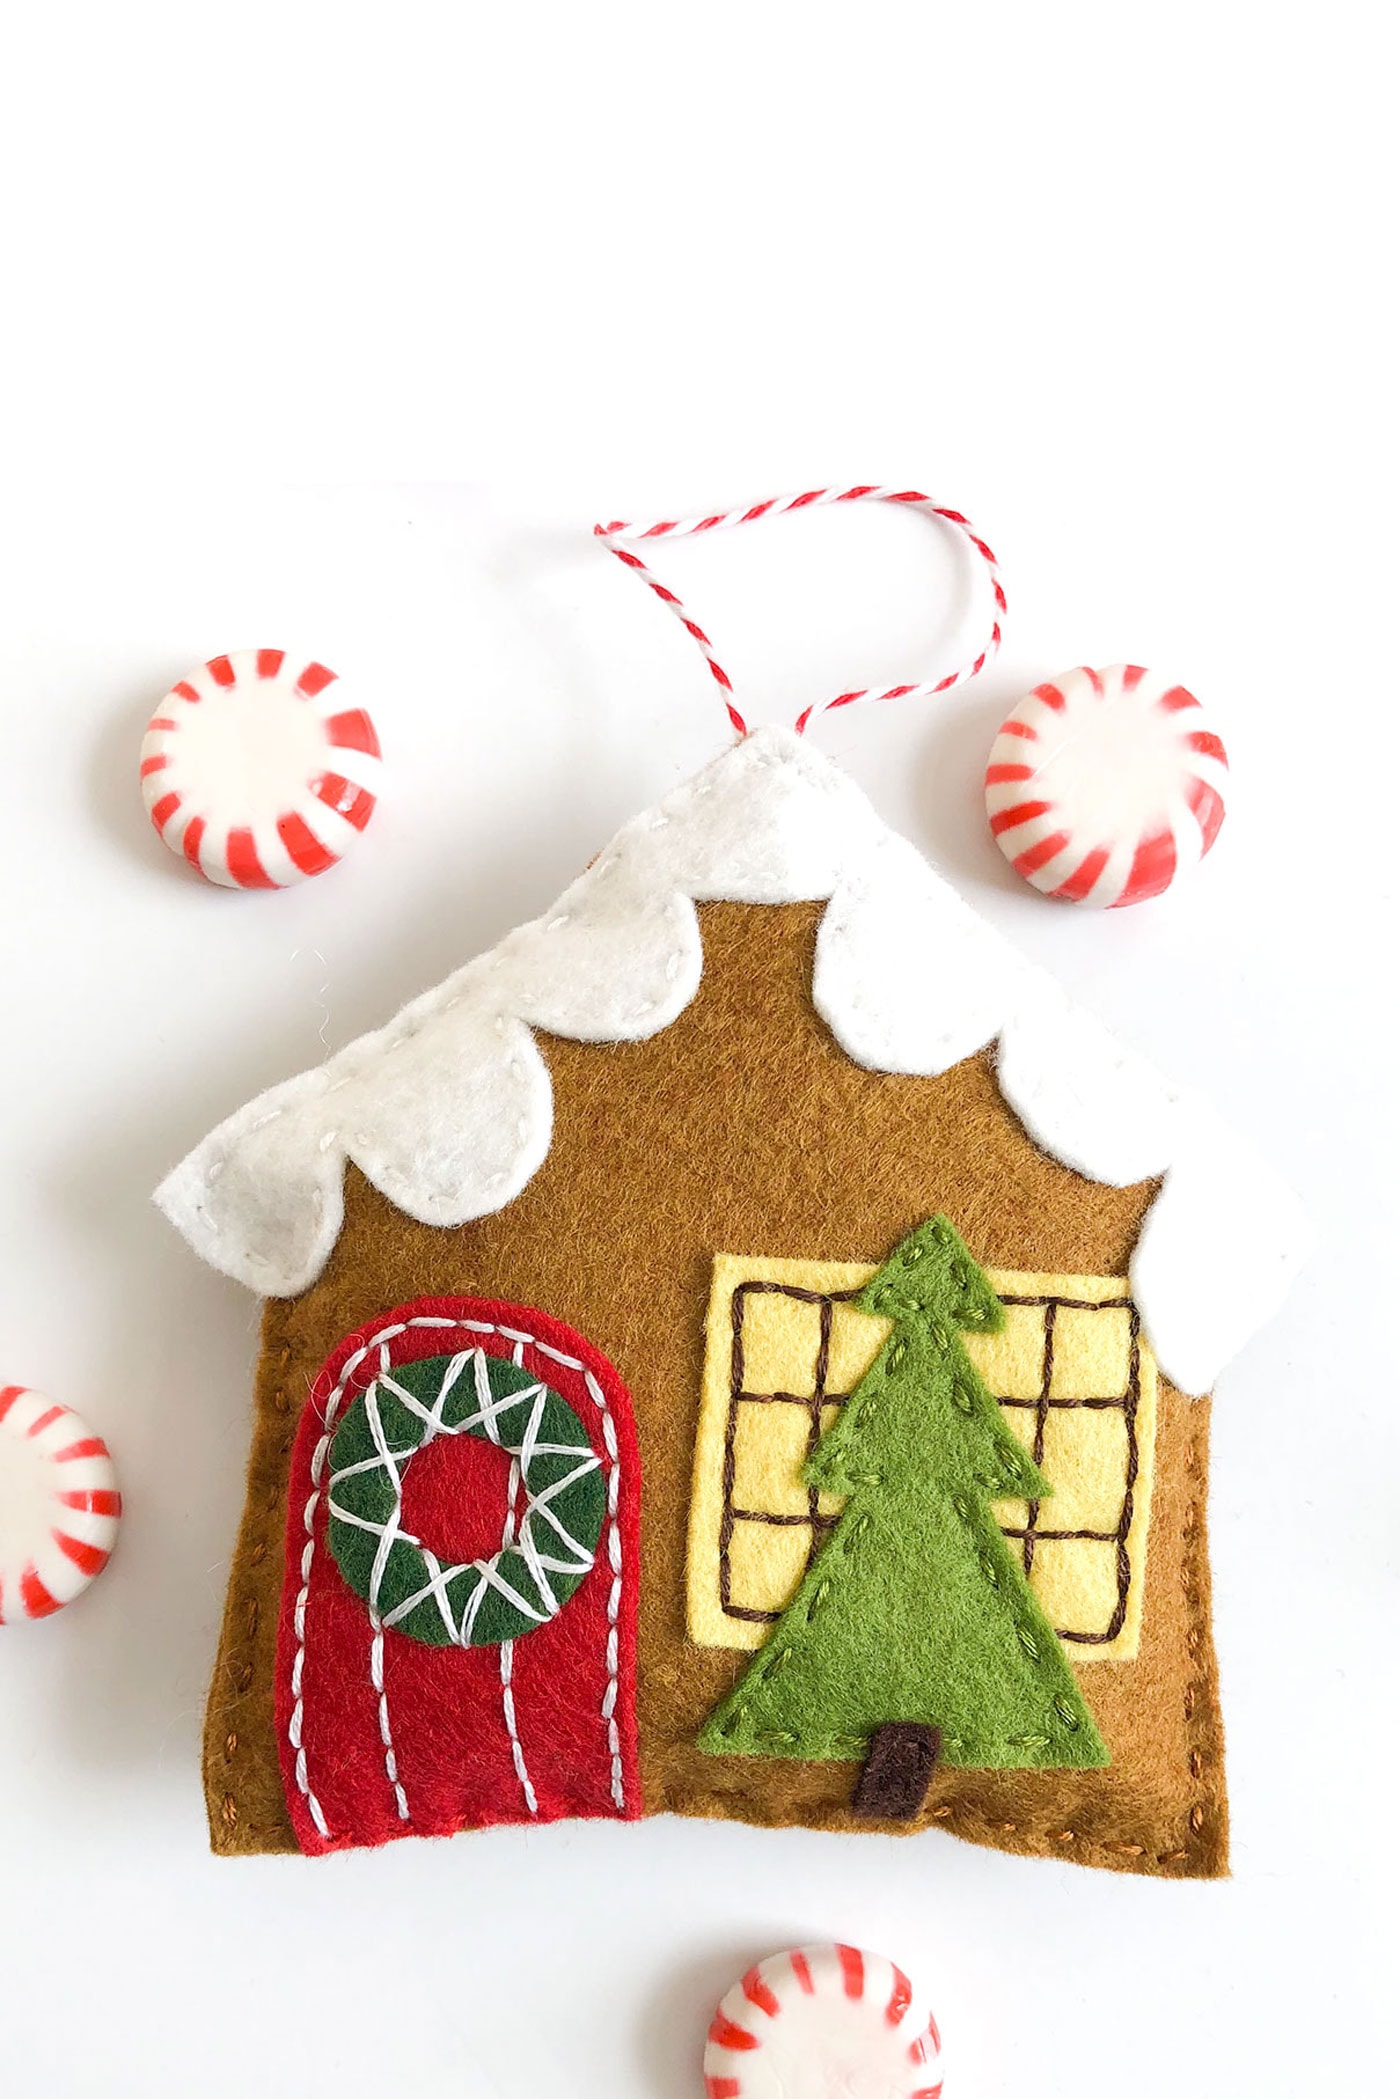 How to Make Felt Christmas Tree Ornaments From Scraps